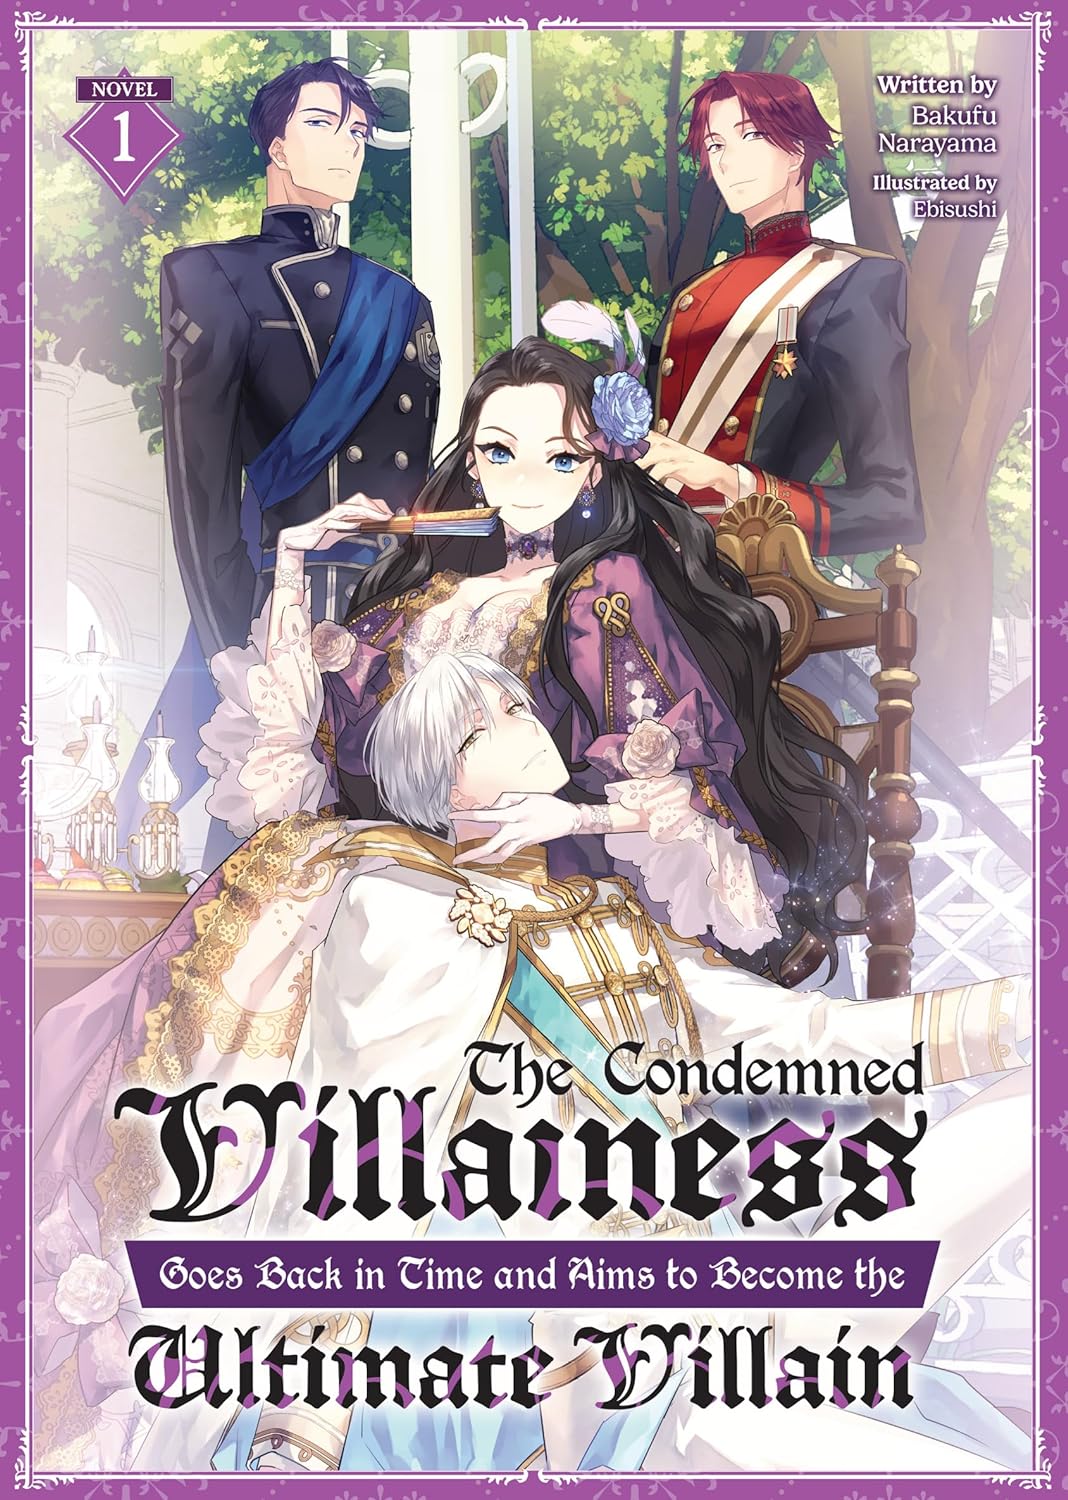 The Condemned Villainess Goes Back in Time and Aims to Become the Ultimate Villain (Light Novel) Vol. 01